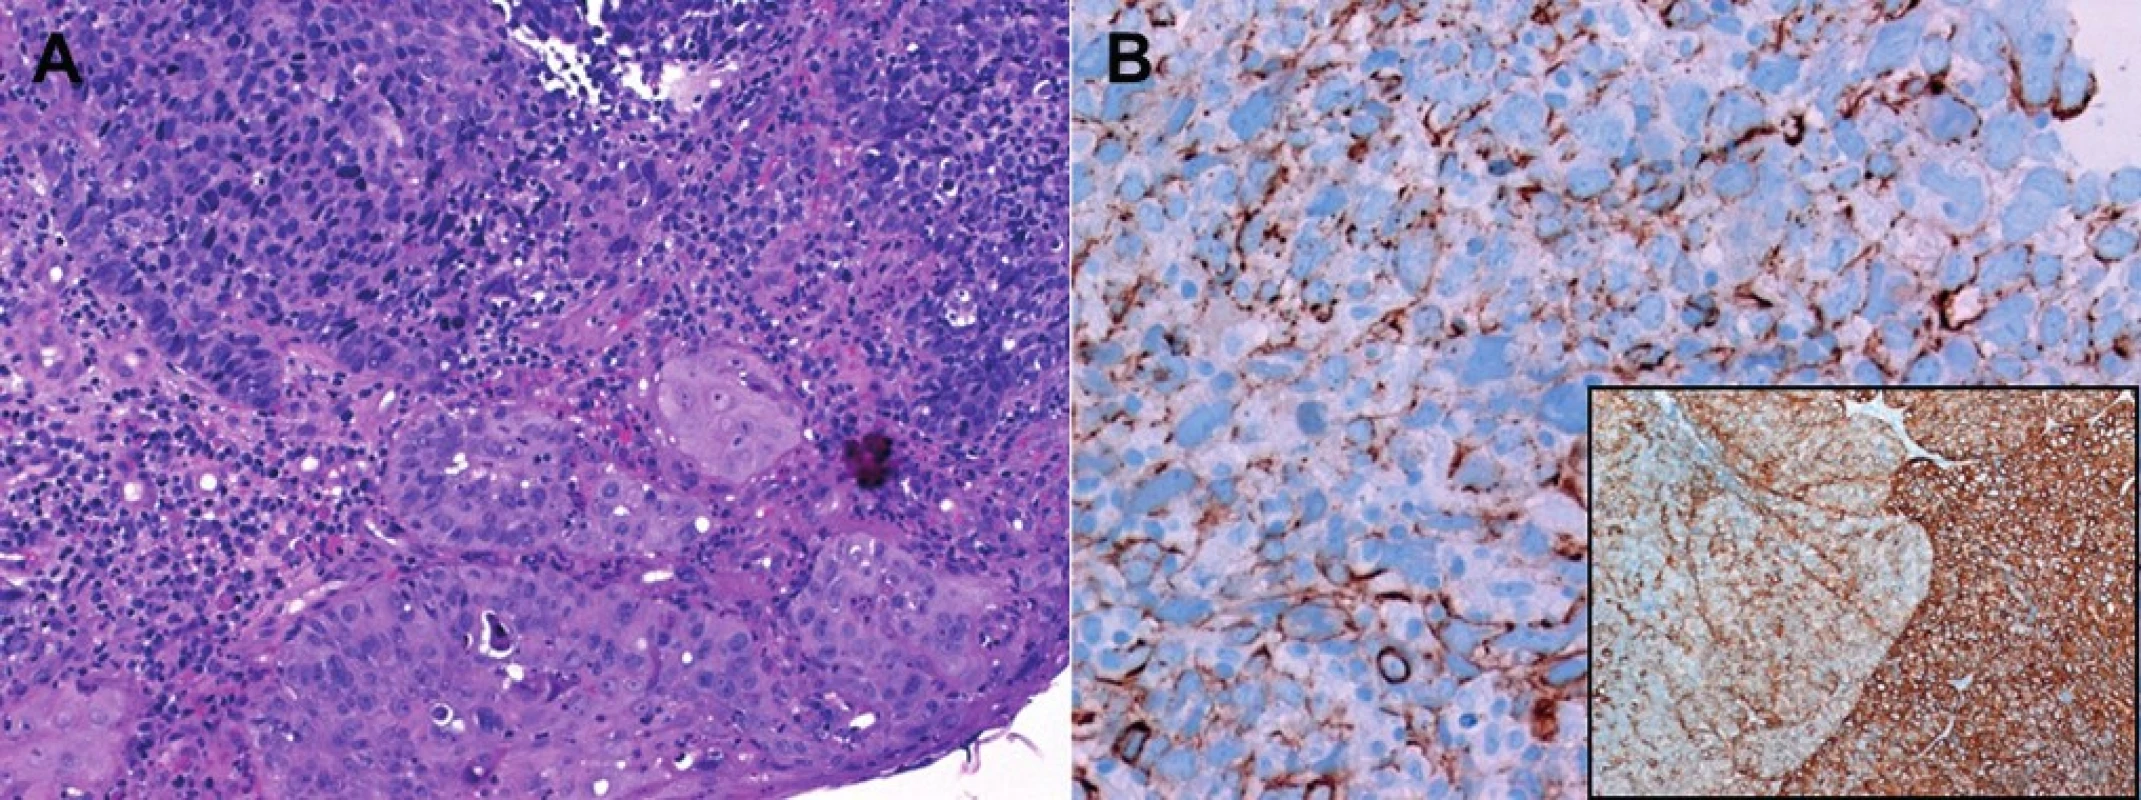 Conventional basaloid SCC of the sinonasal tract (A, upper field) associated with dysplastic surface epithelium. B: Cytokeratin 5/6 may show perinuclear pattern closely resembling the pattern of pan-CK seen in SCNEC (main image), but the tumor lacks any neuroendocrine marker reactivity. Subimage: overview of CK5/6 showing basaloid component (left) abutting conventional SCC component (right).